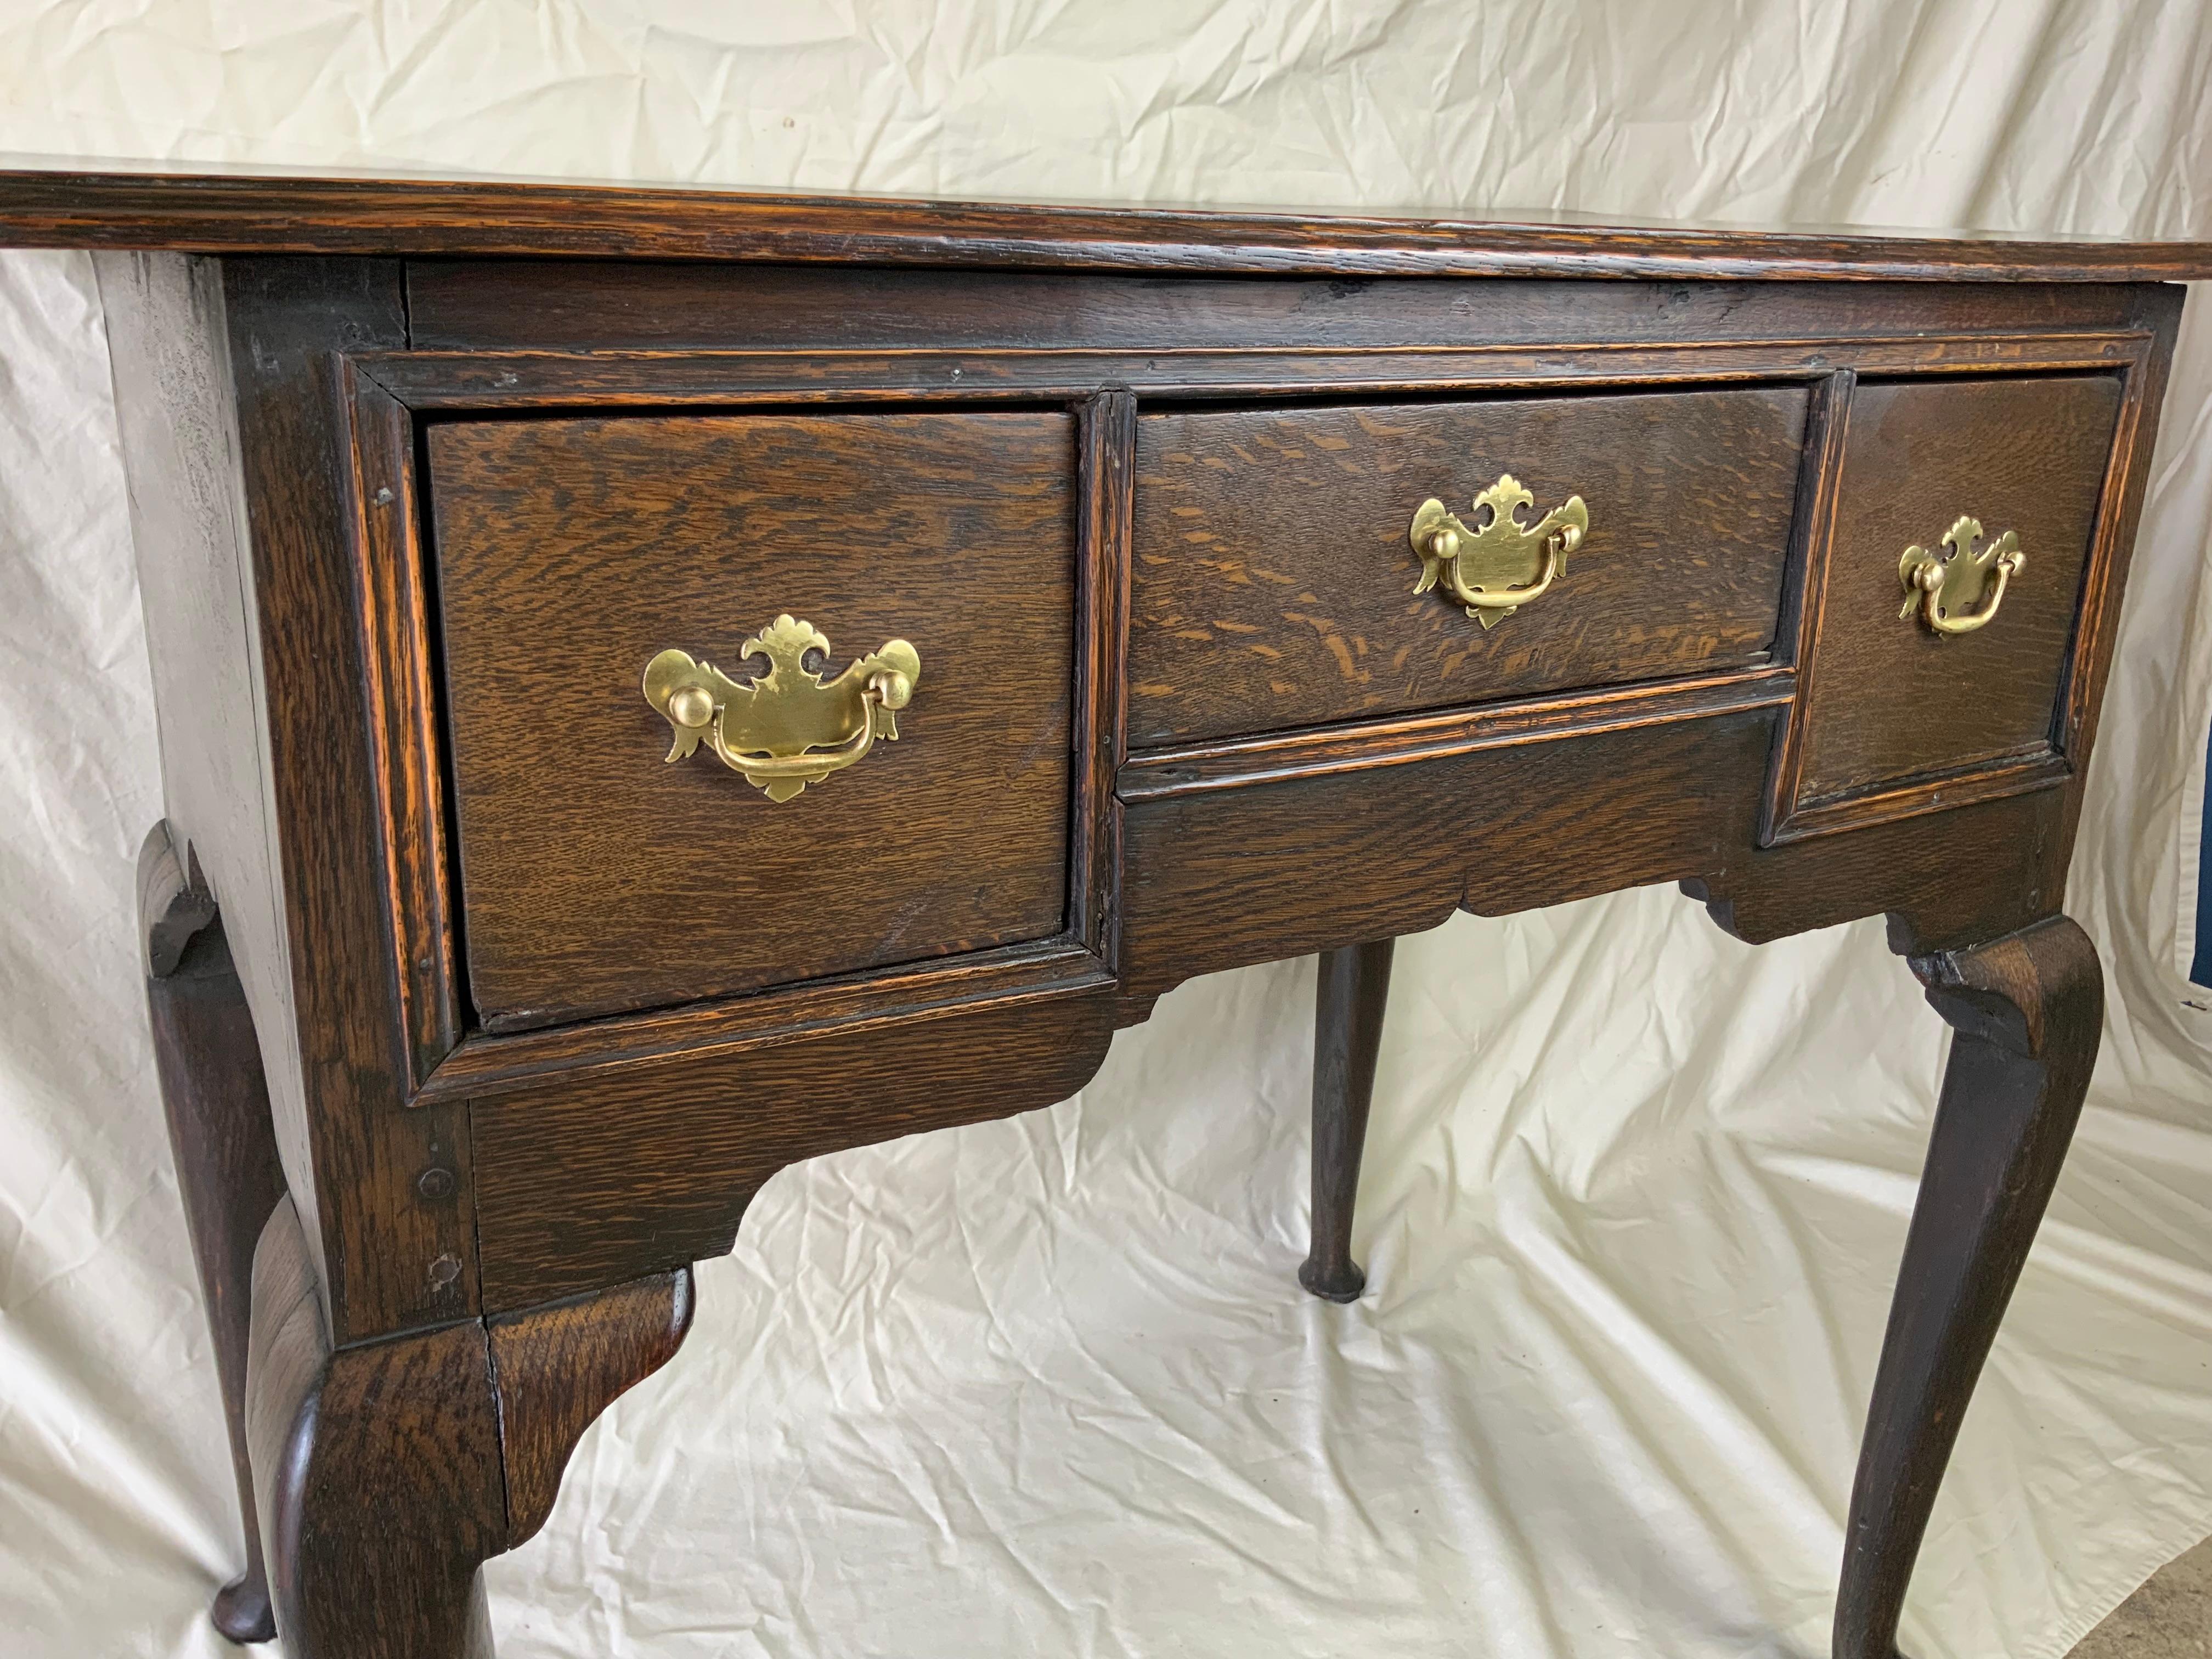 A very nice Queen Anne Oak lowboy with a large overhanging molded edge top over three drawers.  Original hardware, locks and finish on this early lowboy. Molded beaded moldings on the case surround the drawer faces. Great old color and patina. 